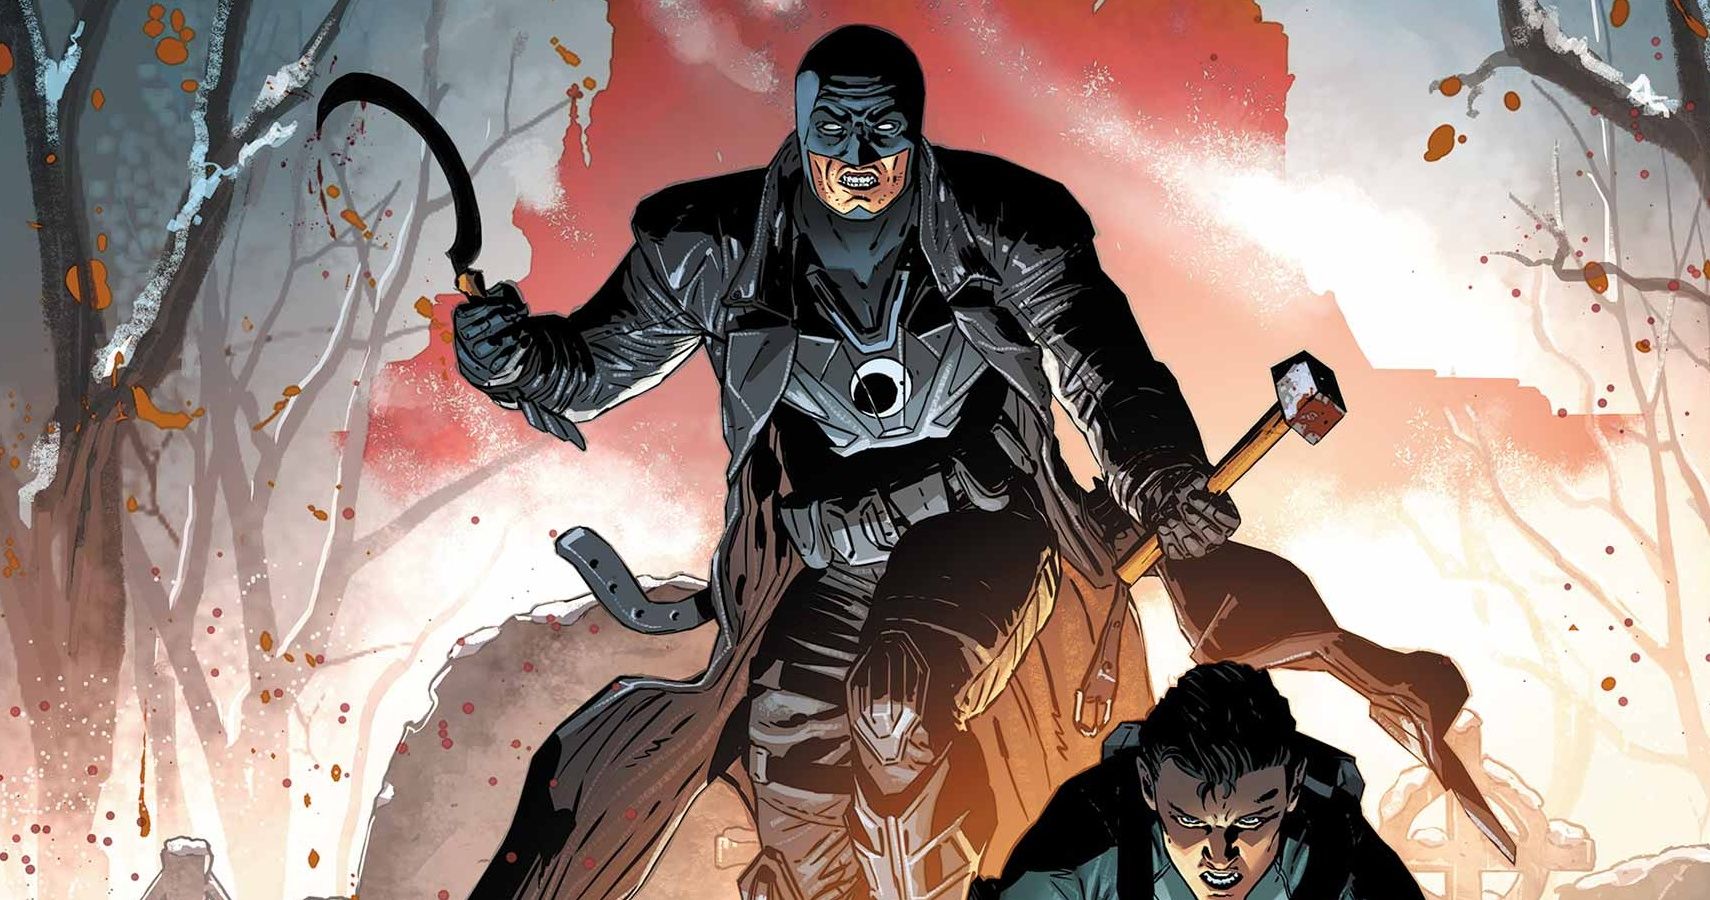 Midnighter from the DC Comics